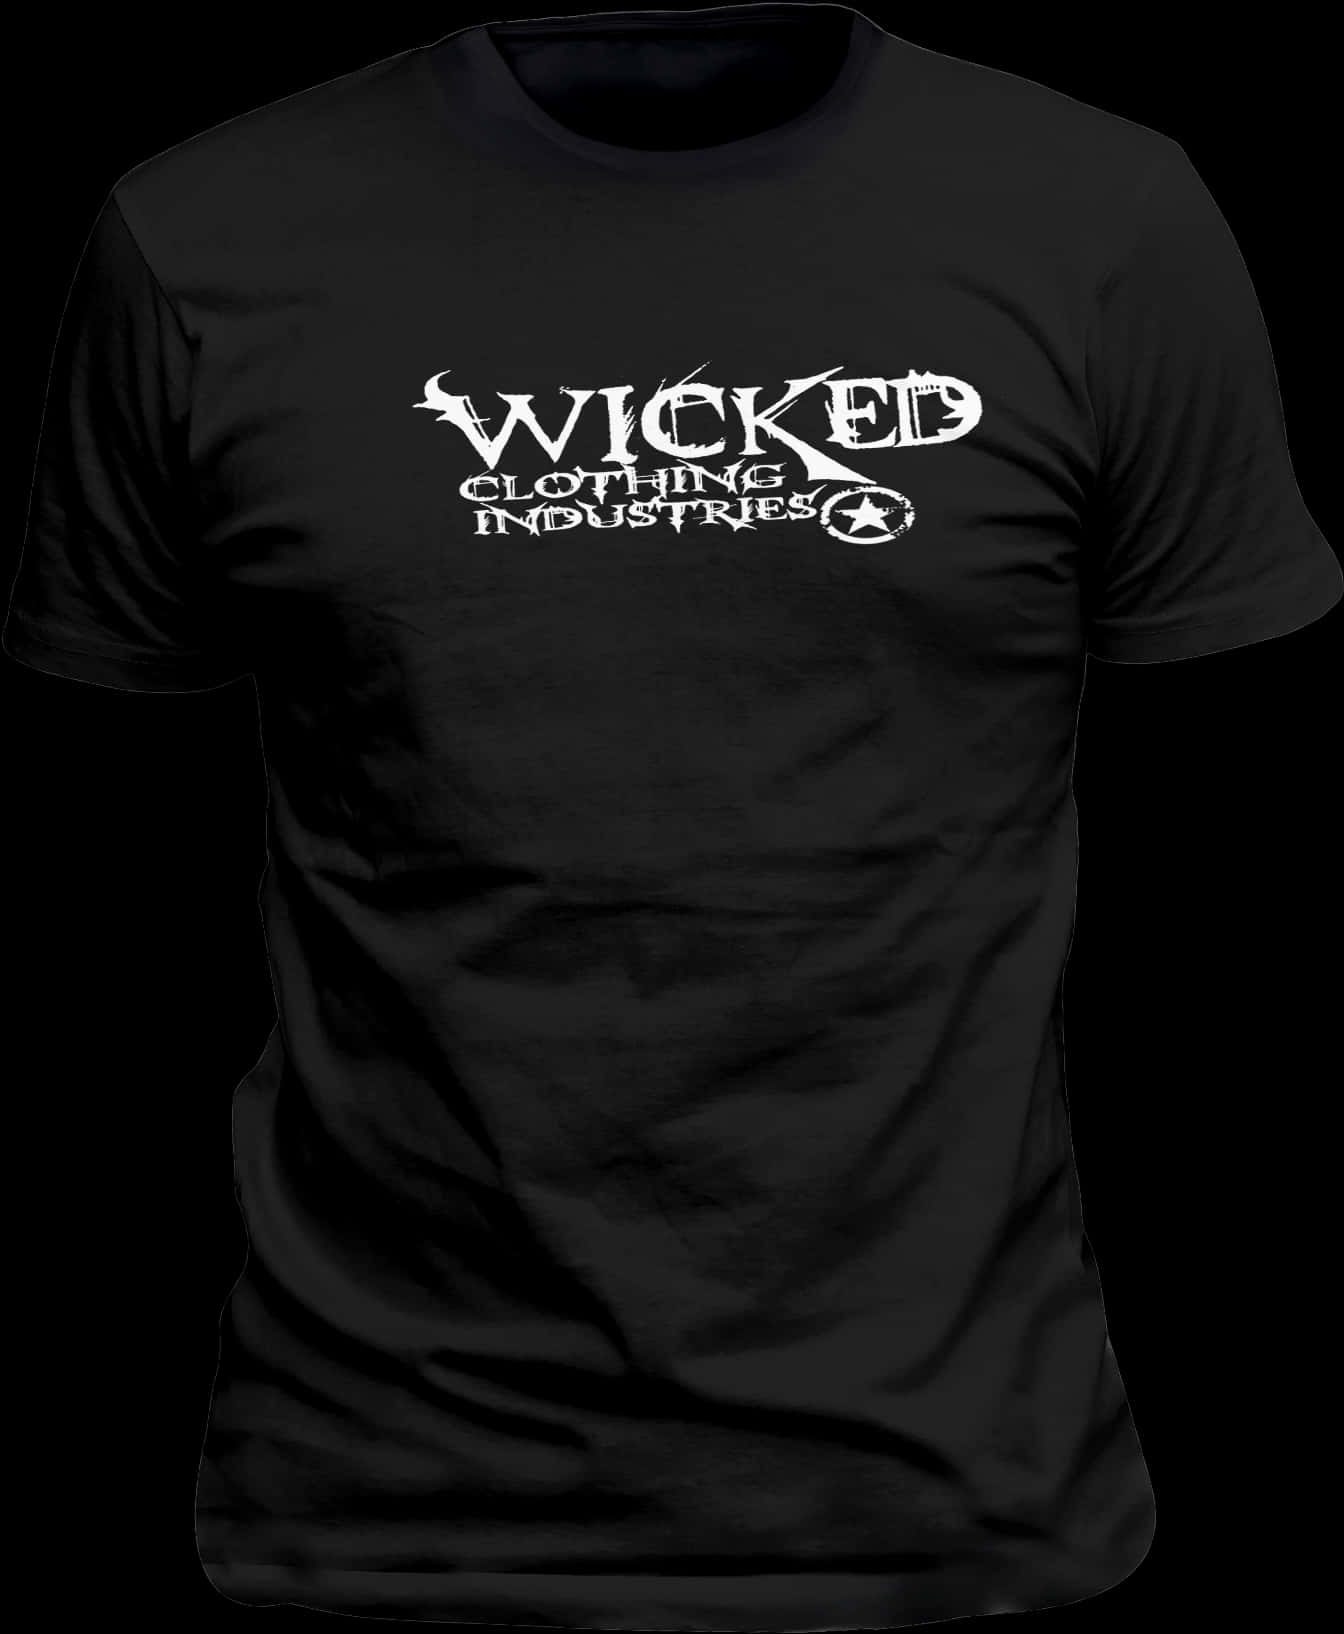 Black Wicked Clothing Industries Shirt PNG